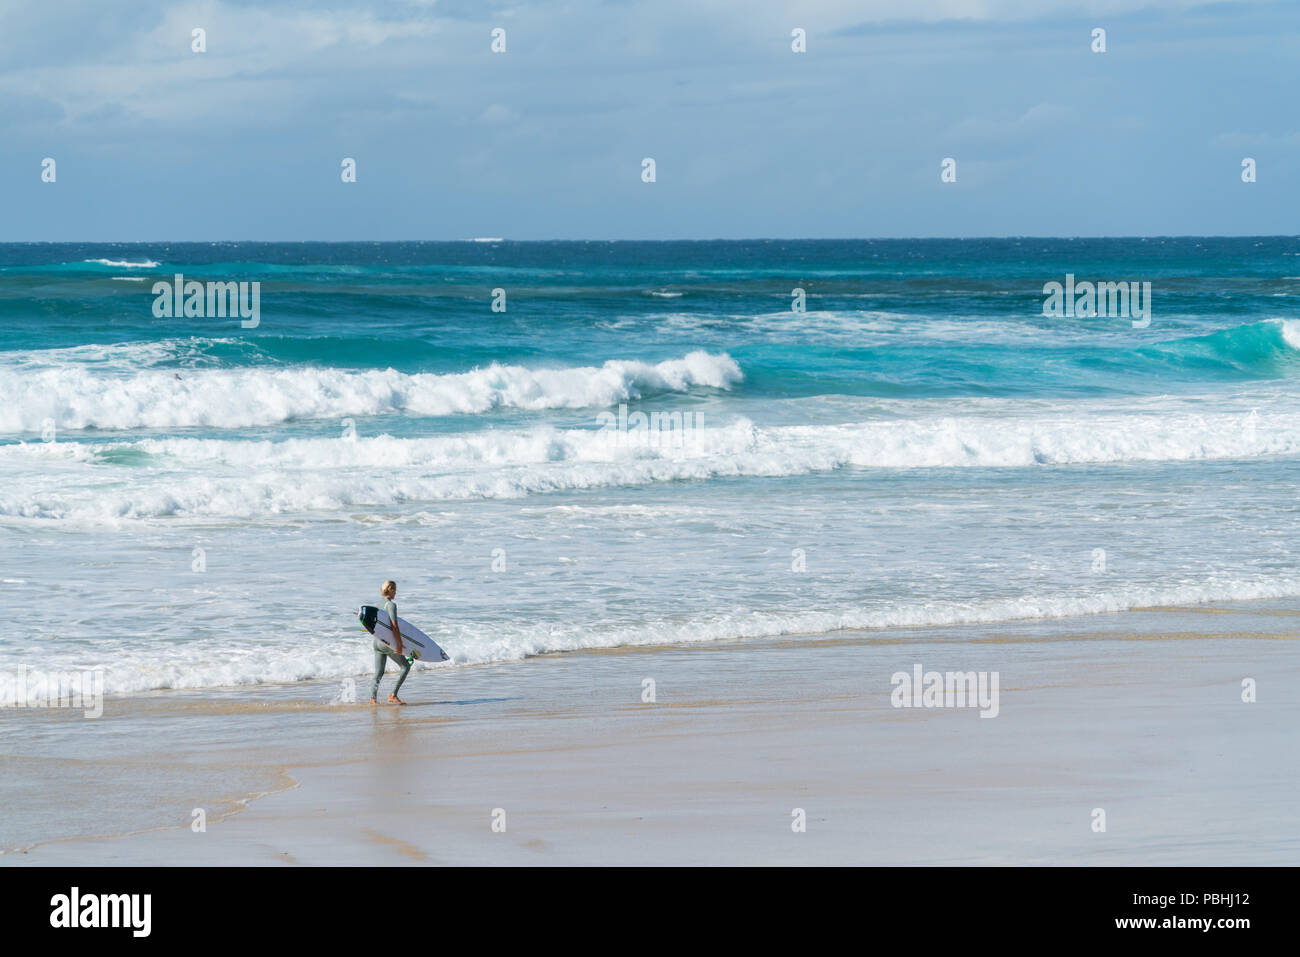 COOLANGATTA, AUSTRALIA - JULY10 2018; Wide surf beach with surfer carrying surfboard along beach in front of surf Stock Photo